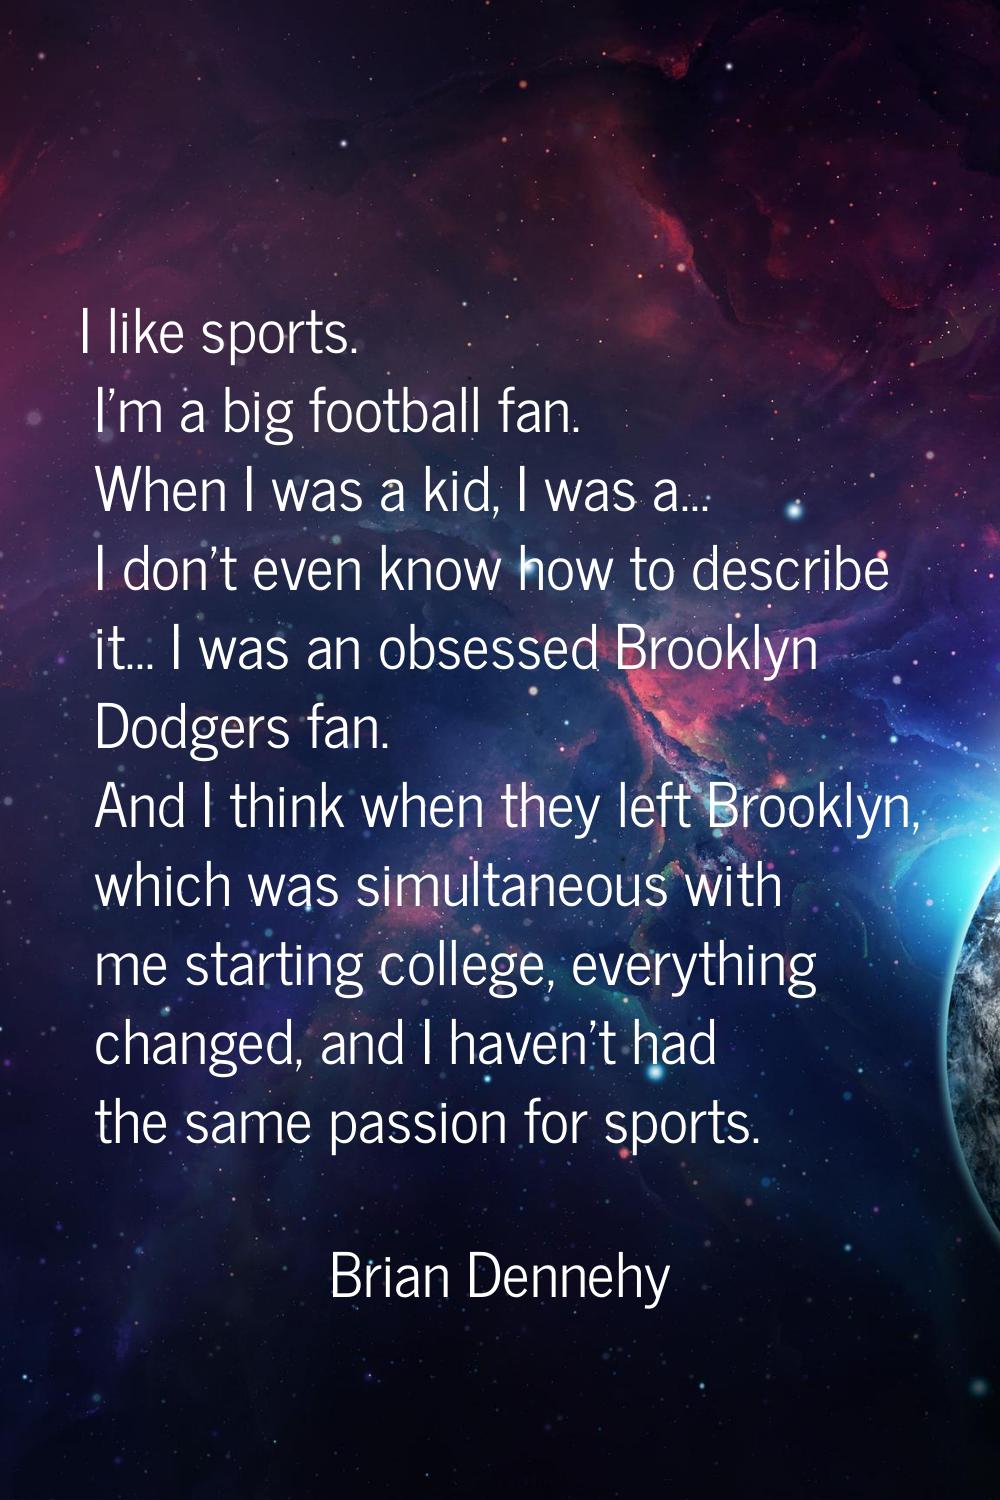 I like sports. I'm a big football fan. When I was a kid, I was a... I don't even know how to descri